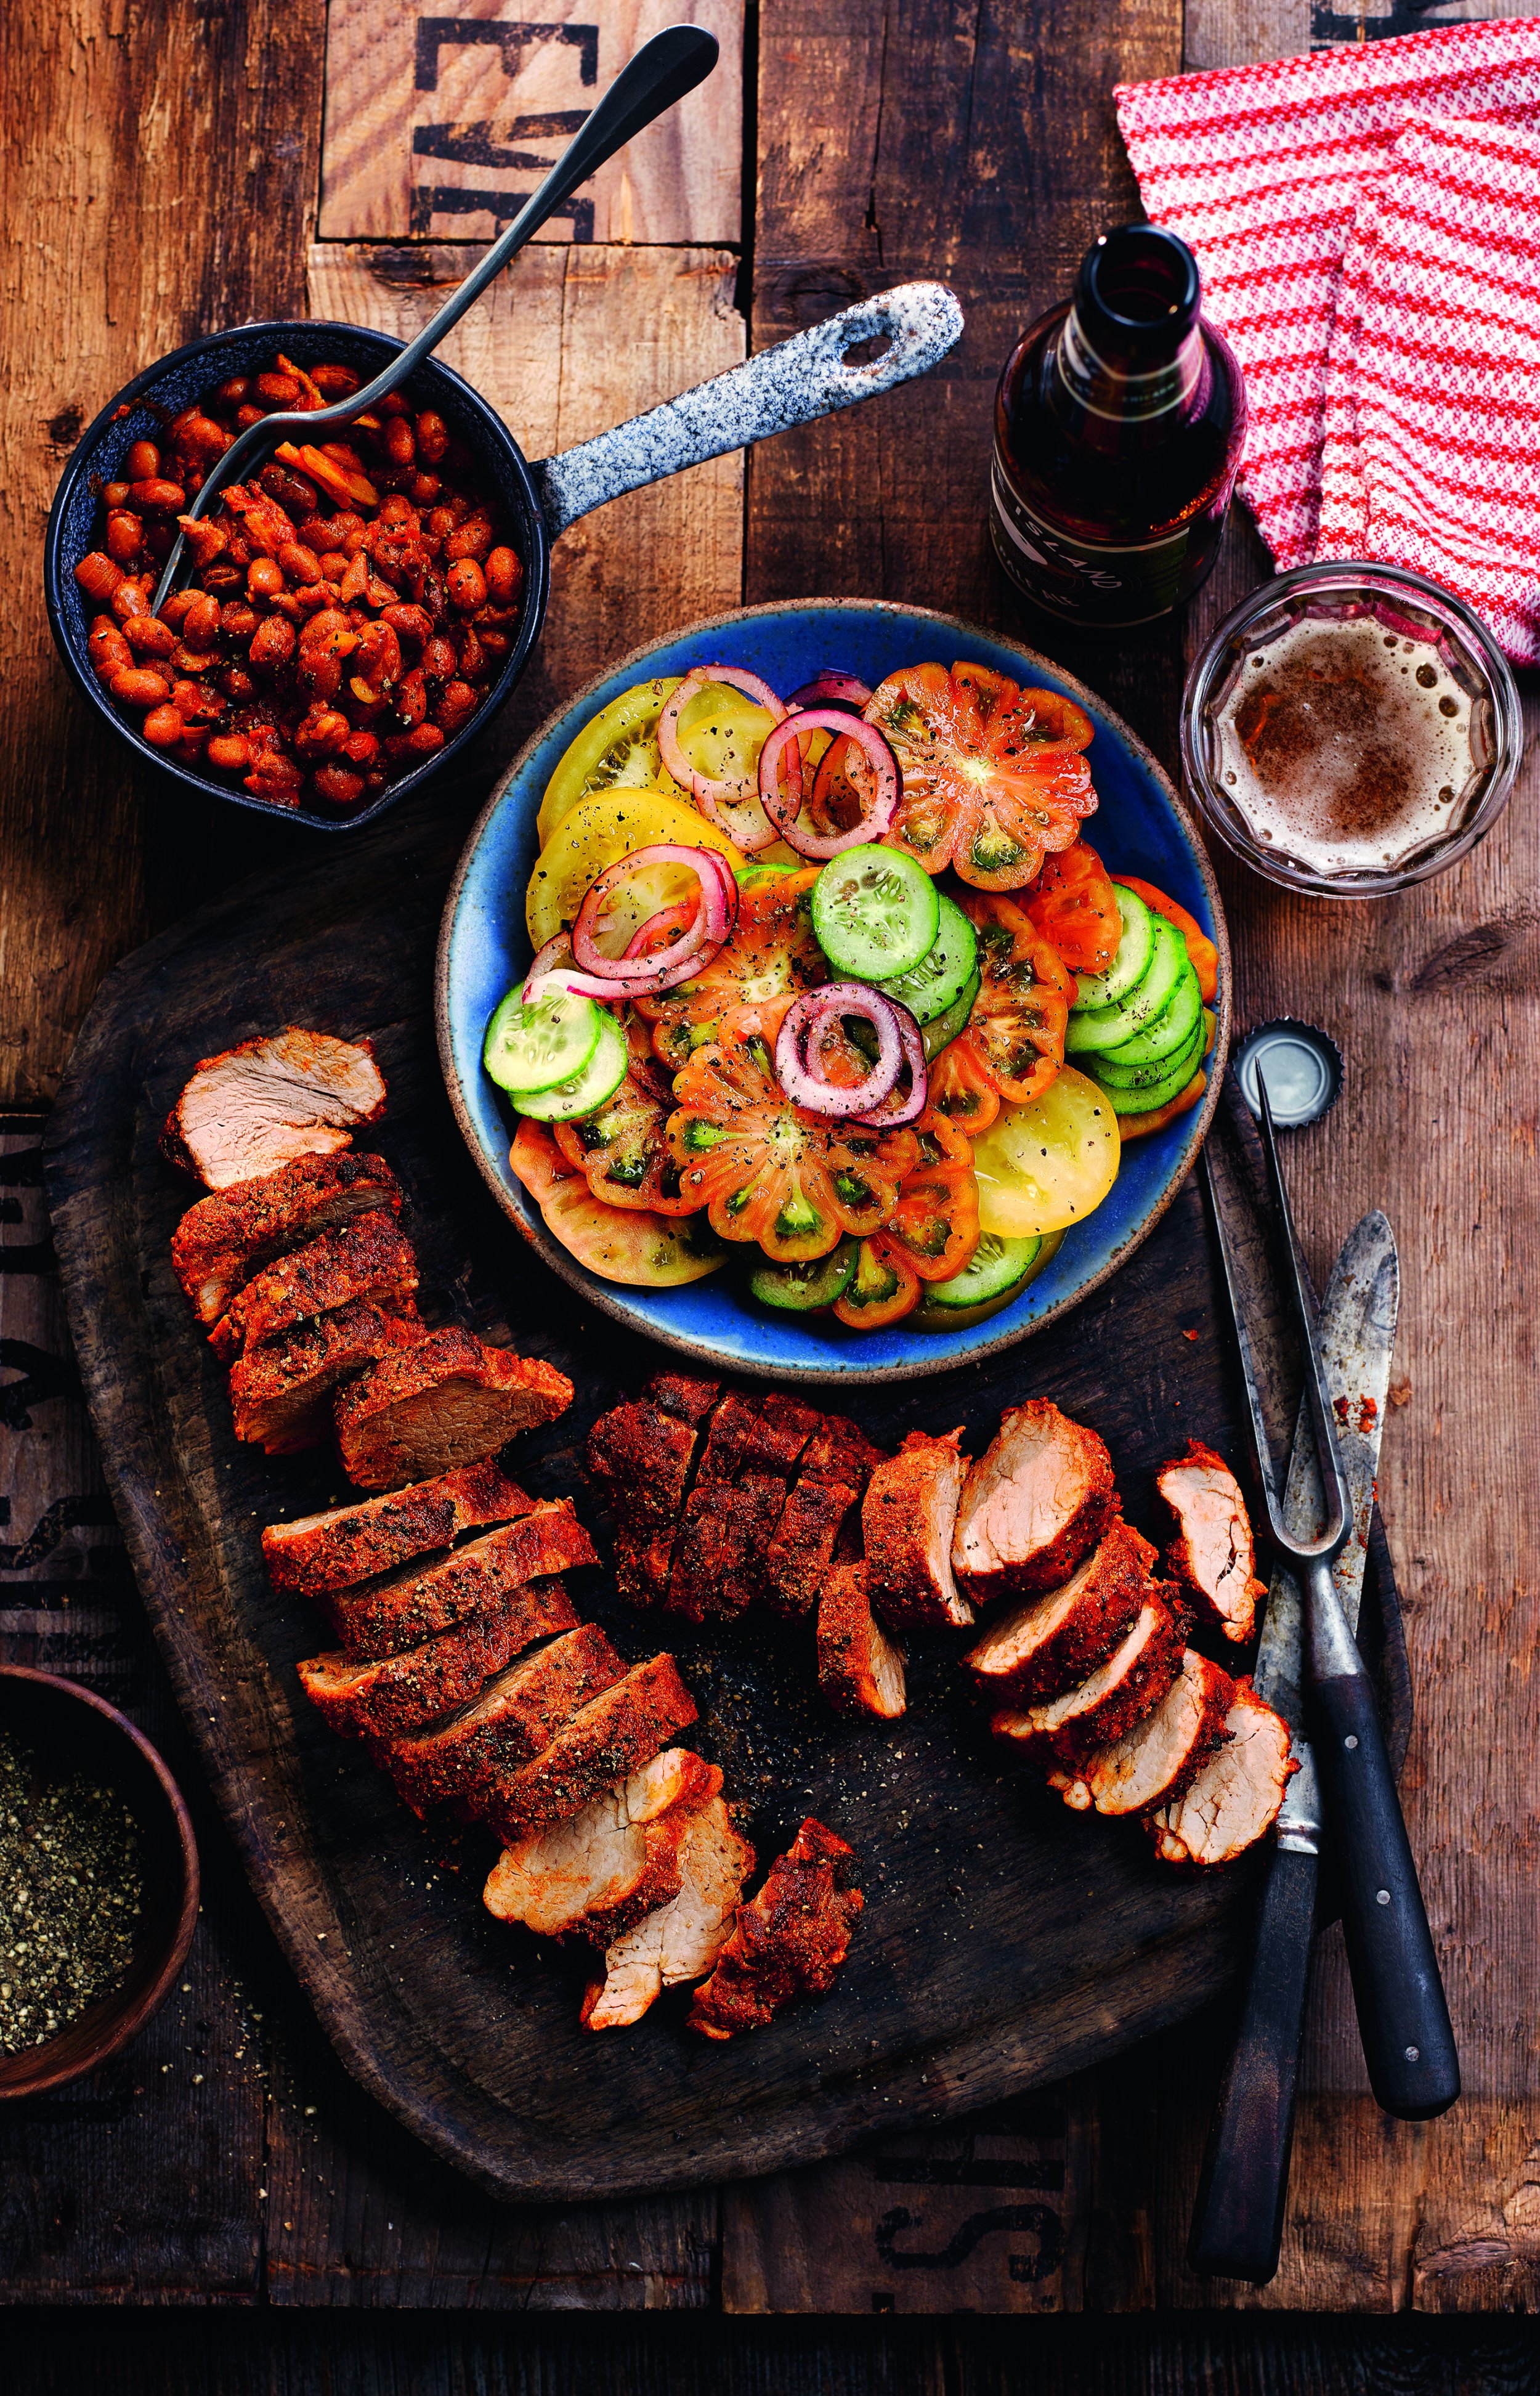 BBQ Pork And Beans With Fresh Tomato Salad